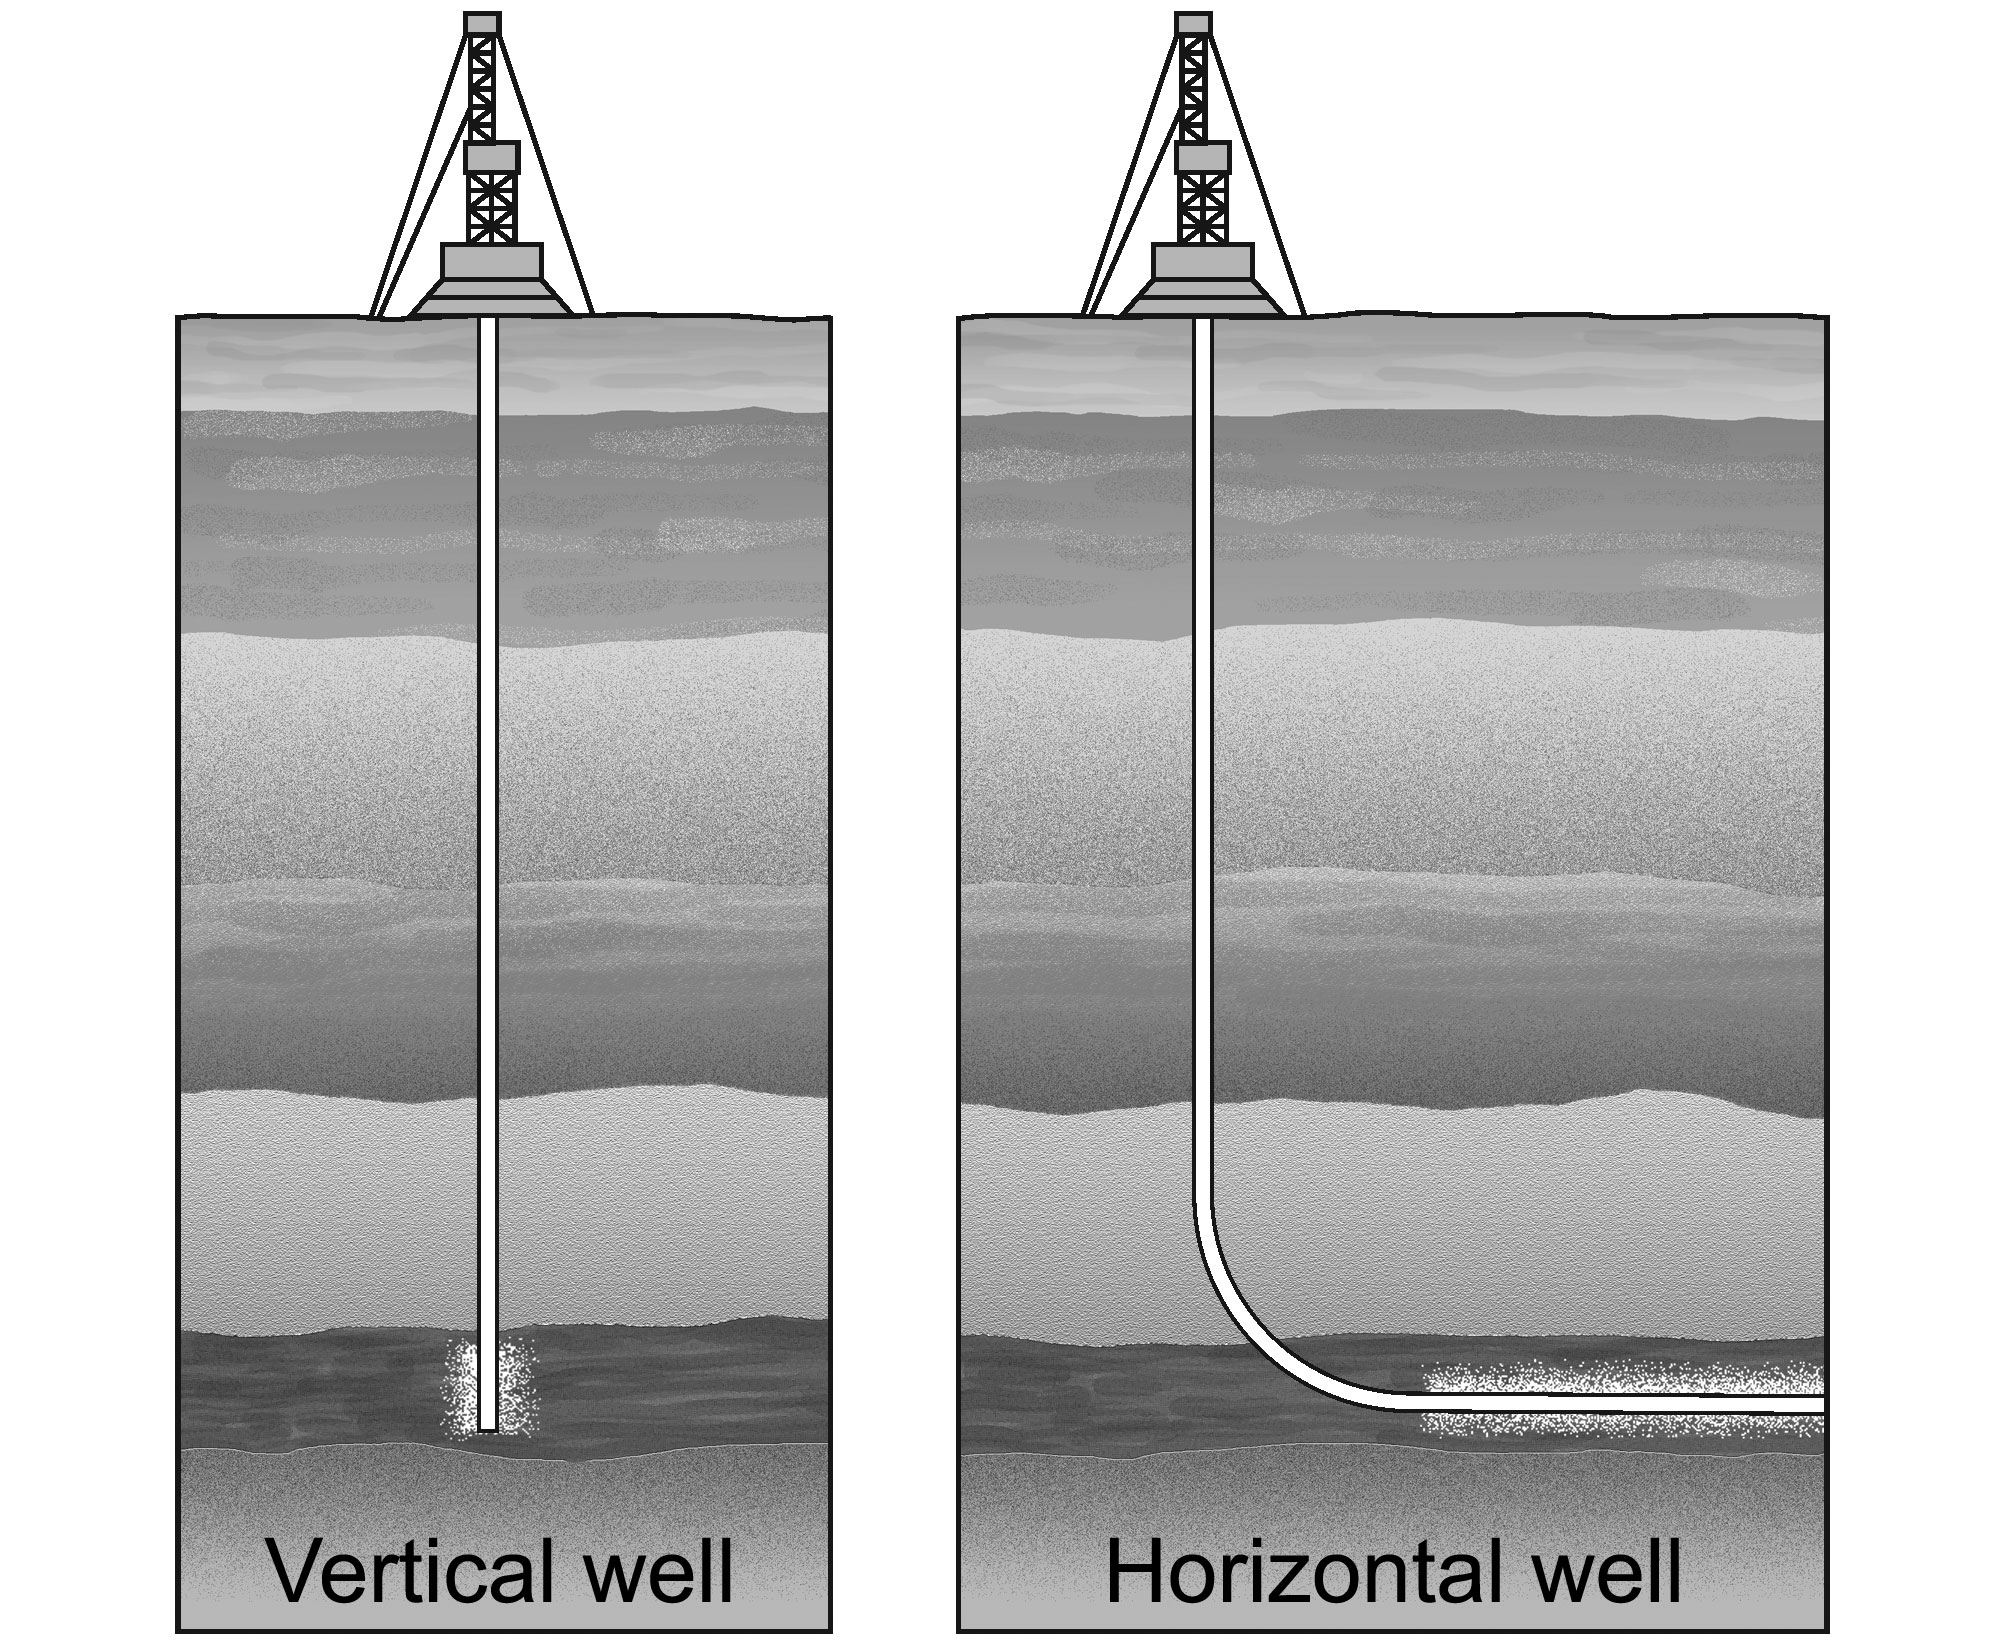 Diagram showing oil wells. Left: Vertical well. Right: Horizontal well; the well is drilled straight down before turning at a nearly 90 degree angle and proceeding horizontally.